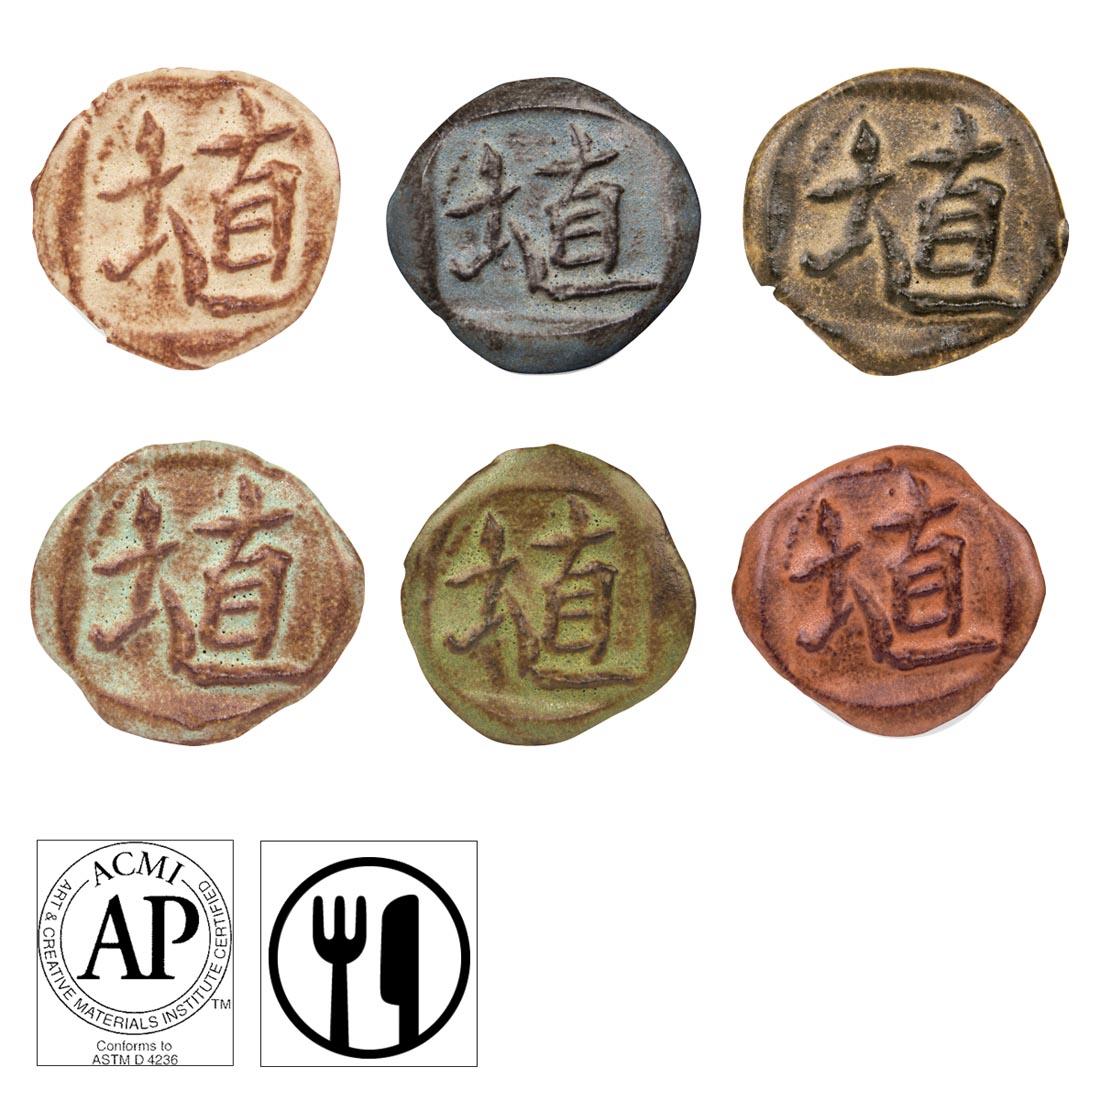 clay chips with AMACO Shino High Fire Matt Glazes applied; symbols for AP Seal and food safe